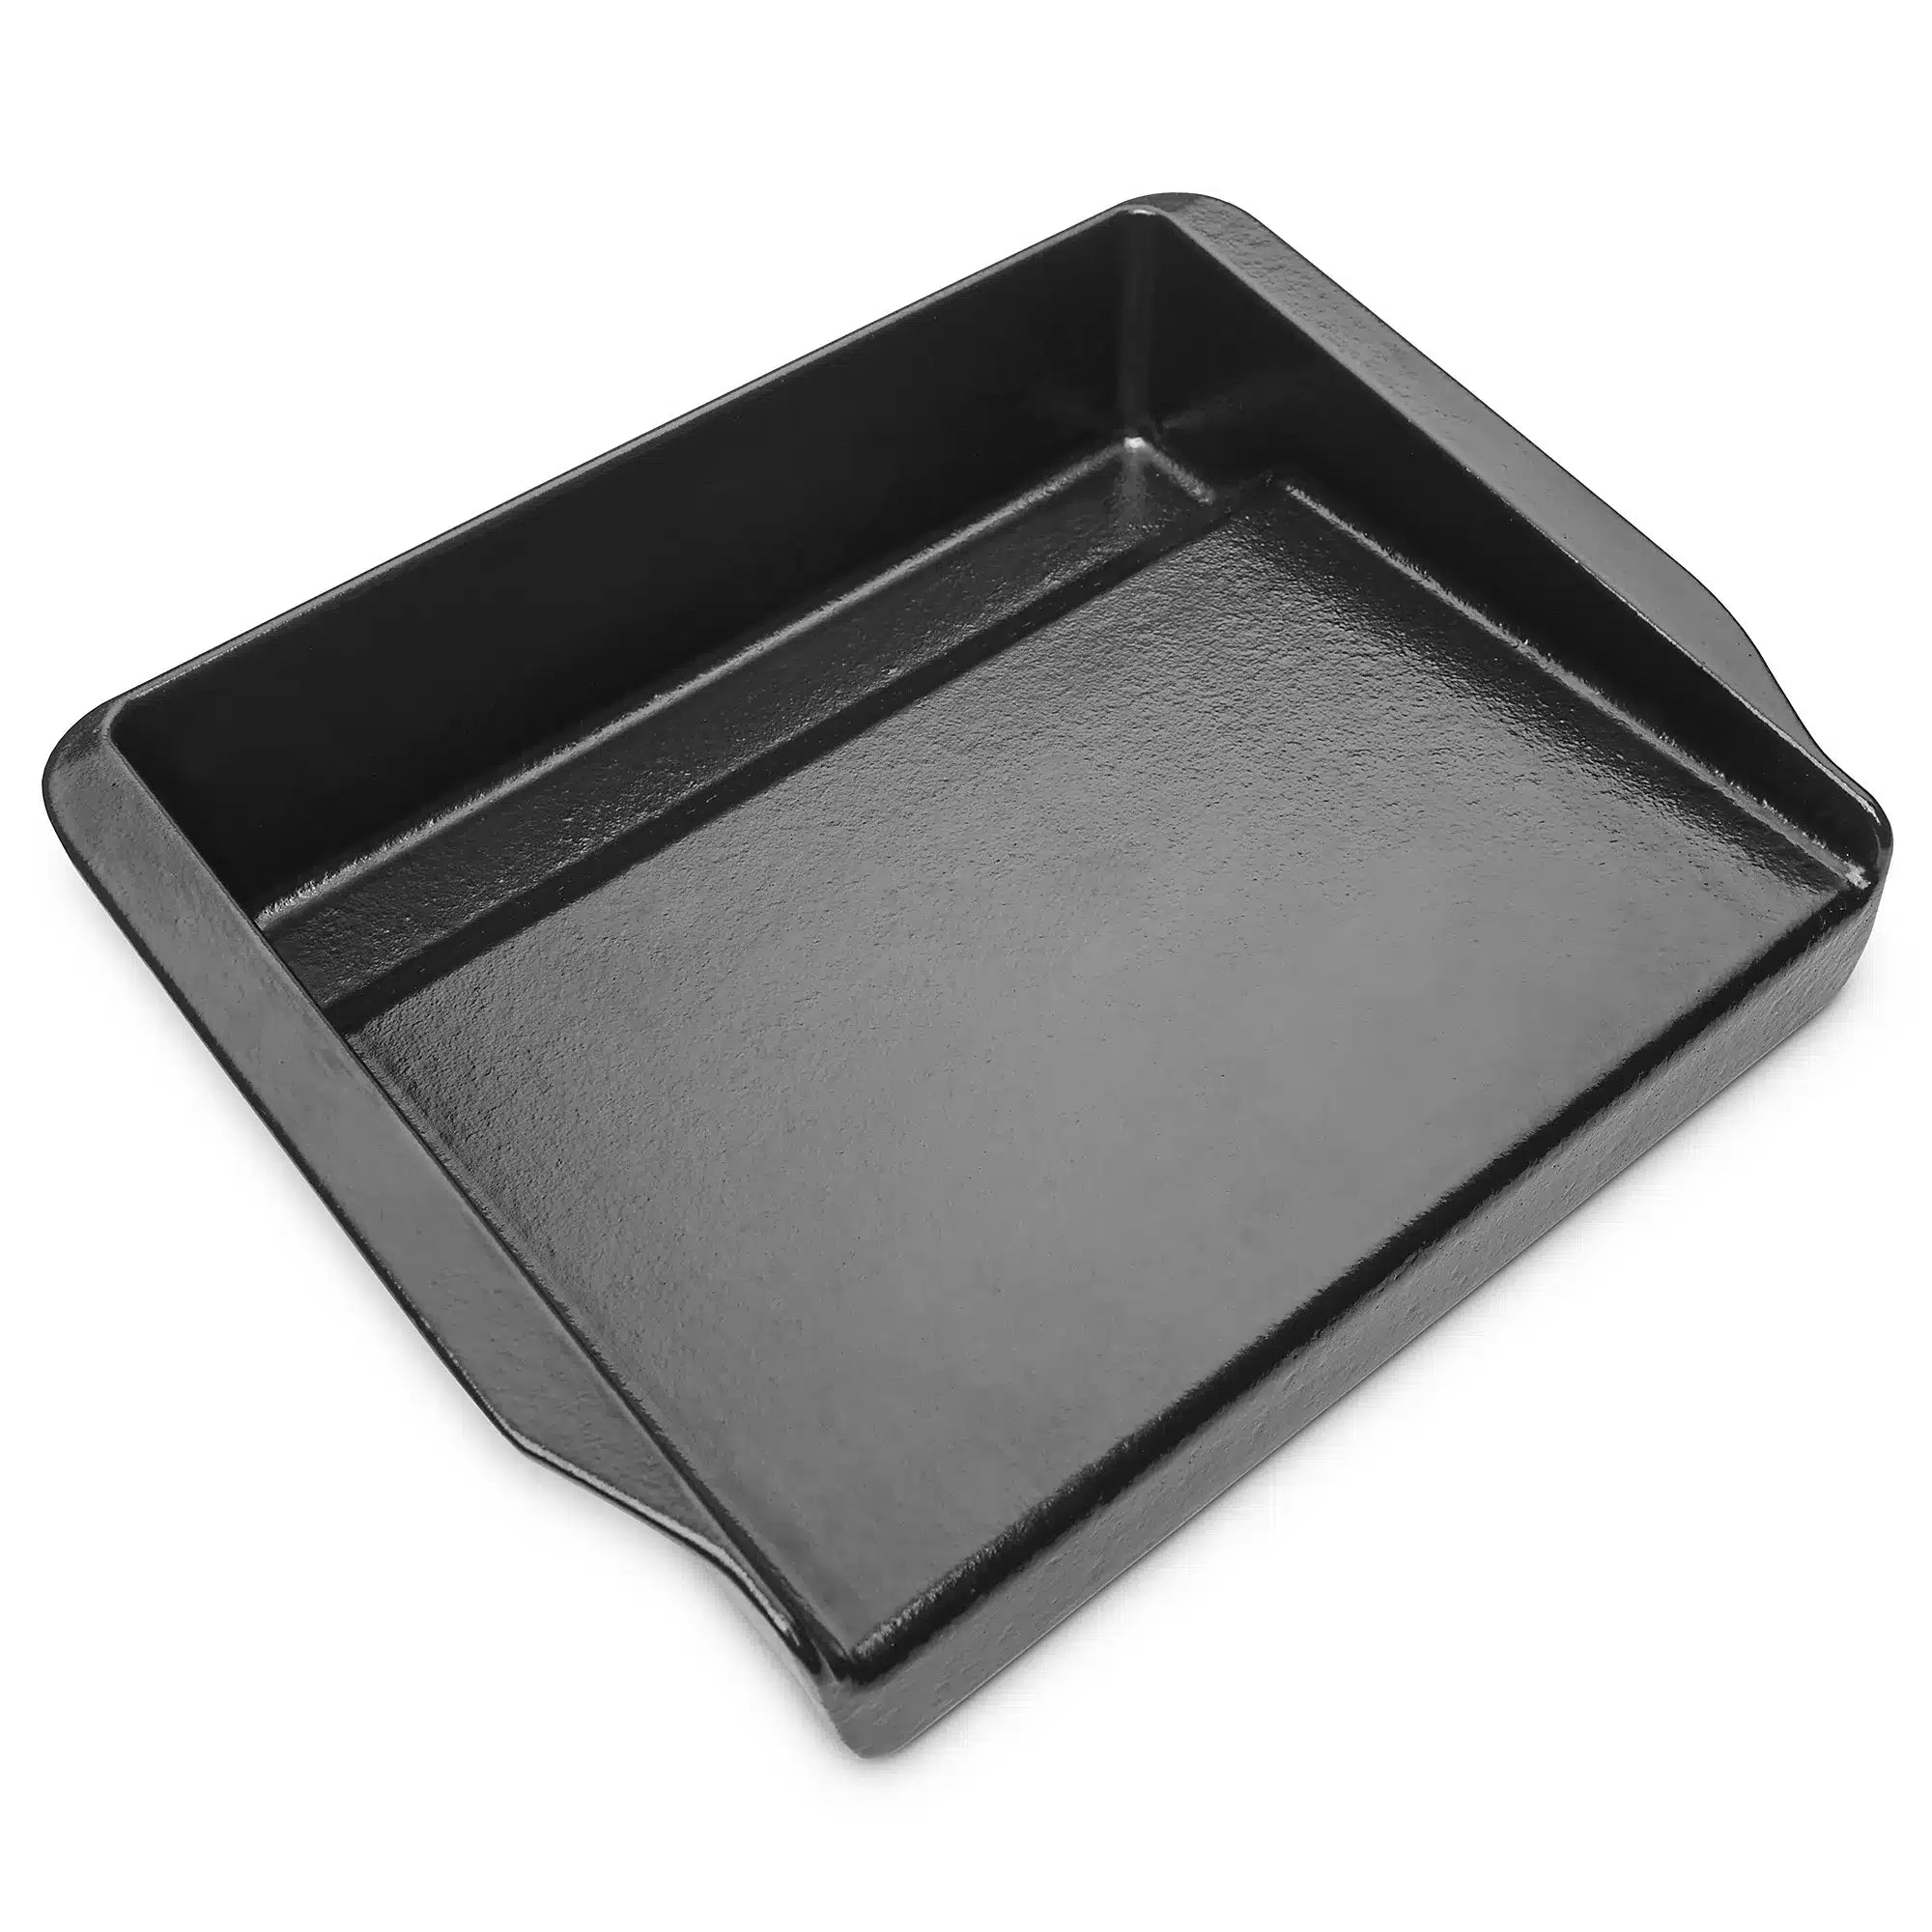 Weber 6609 Cast Iron Griddle for Barbecue Grill Tray- Cooking Tray 31.8x24.9x7cm 9155